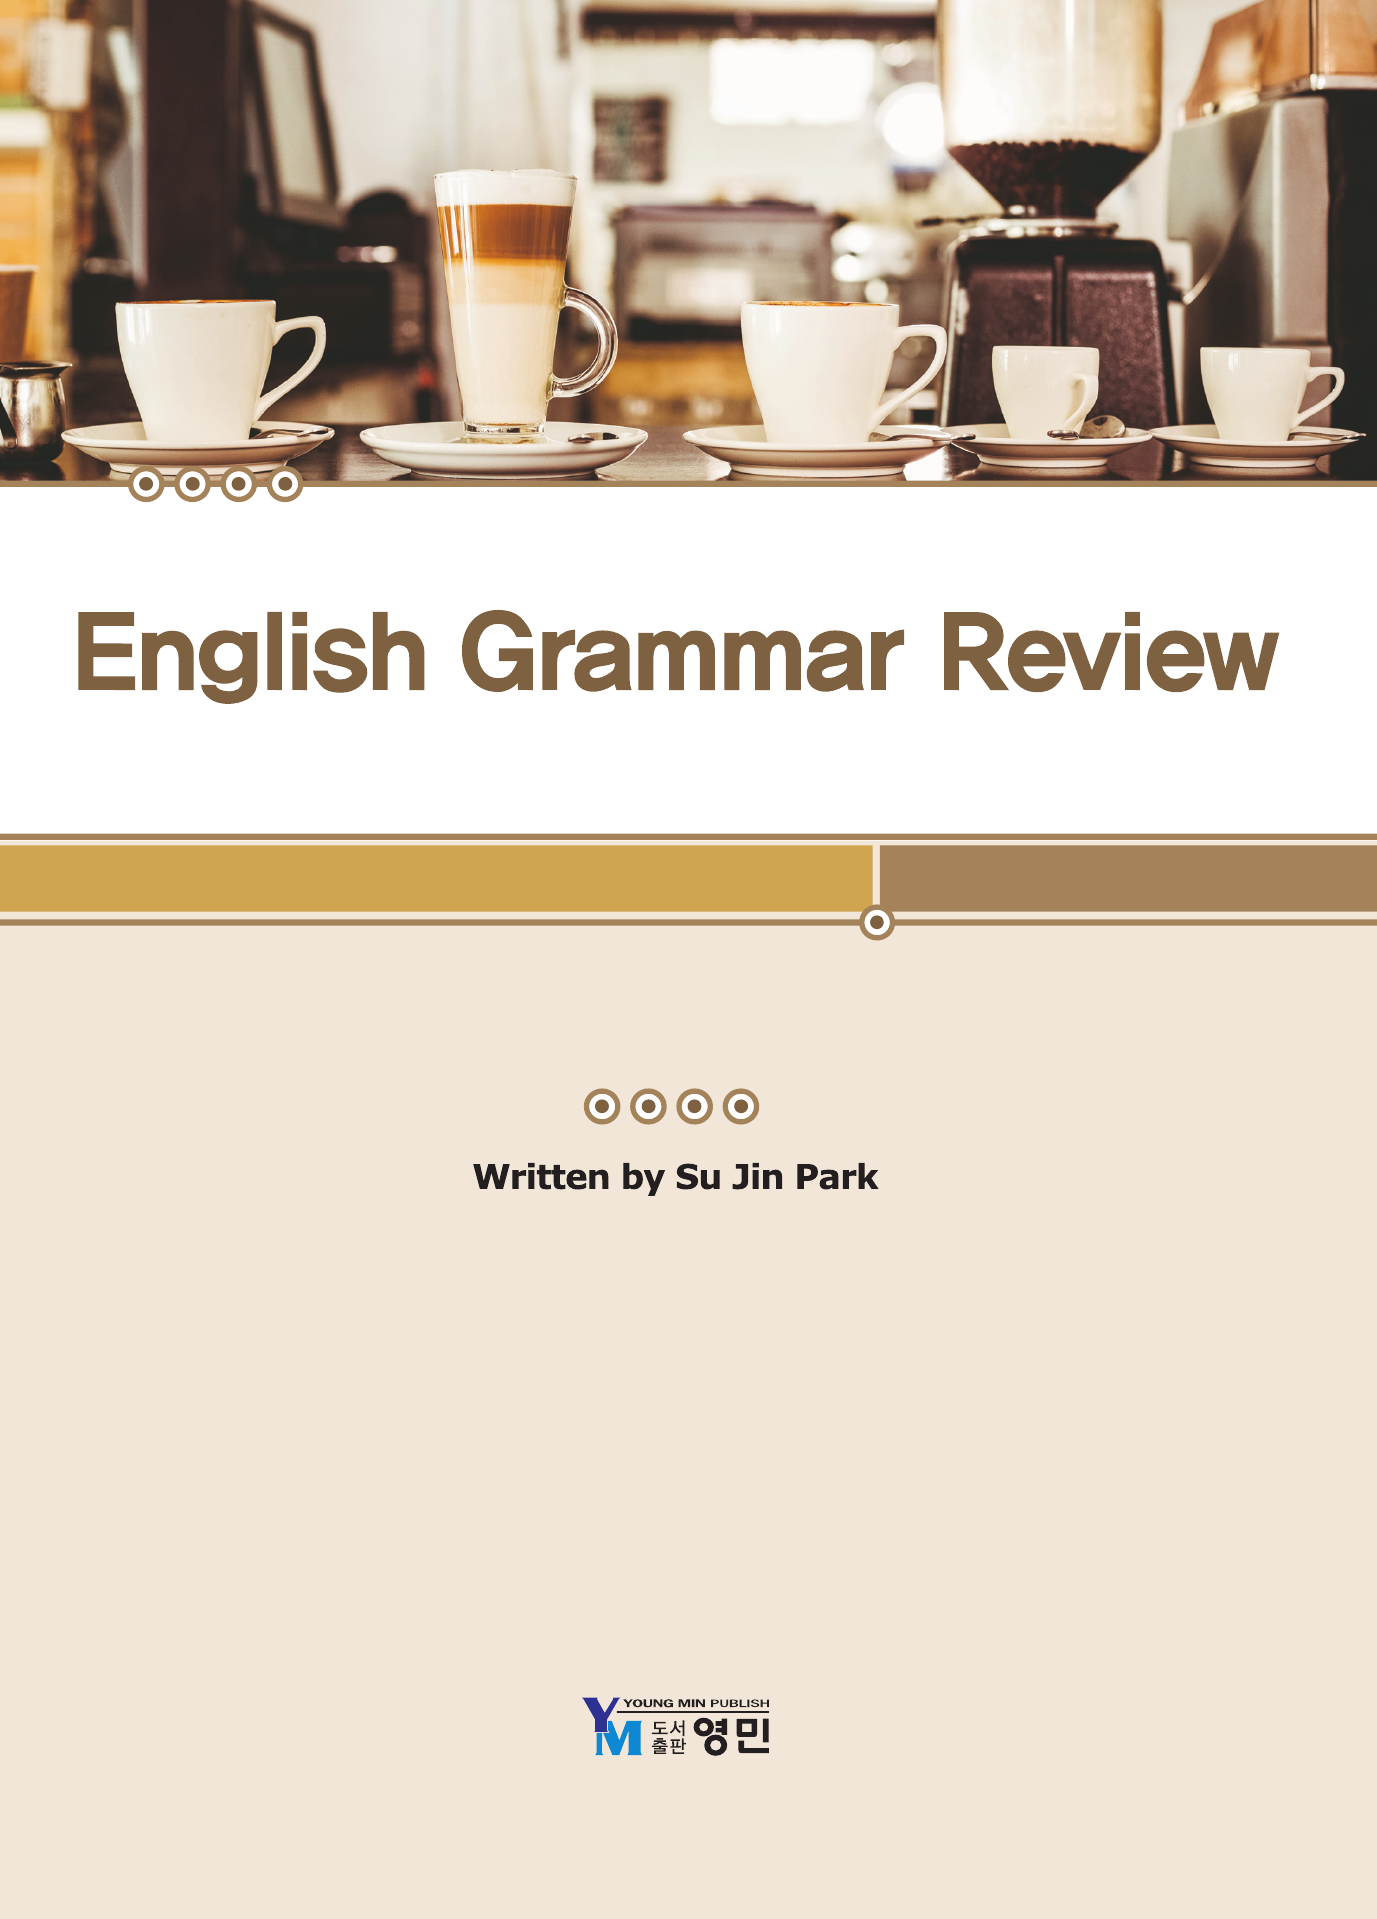 English Grammar in Review